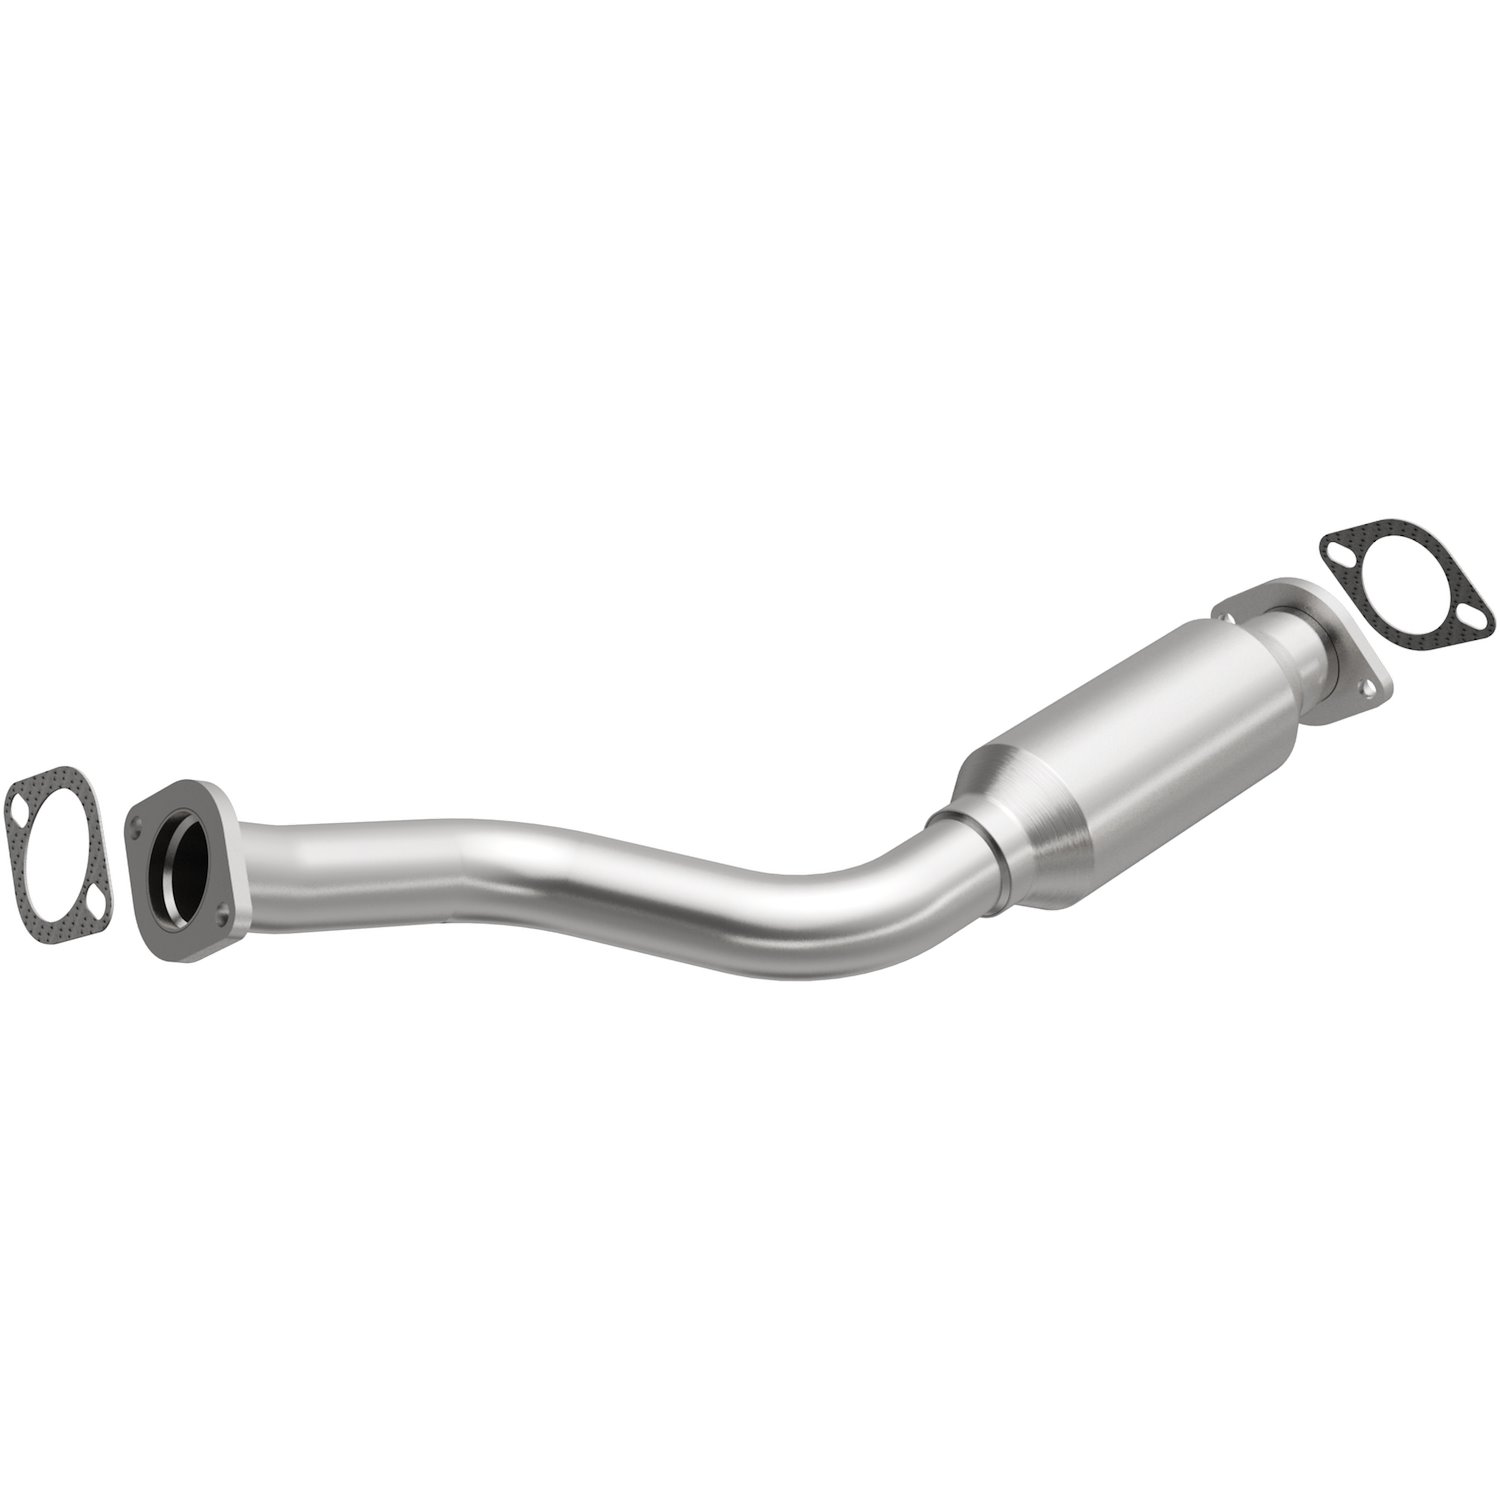 2008-2013 Nissan Rogue California Grade CARB Compliant Direct-Fit Catalytic Converter